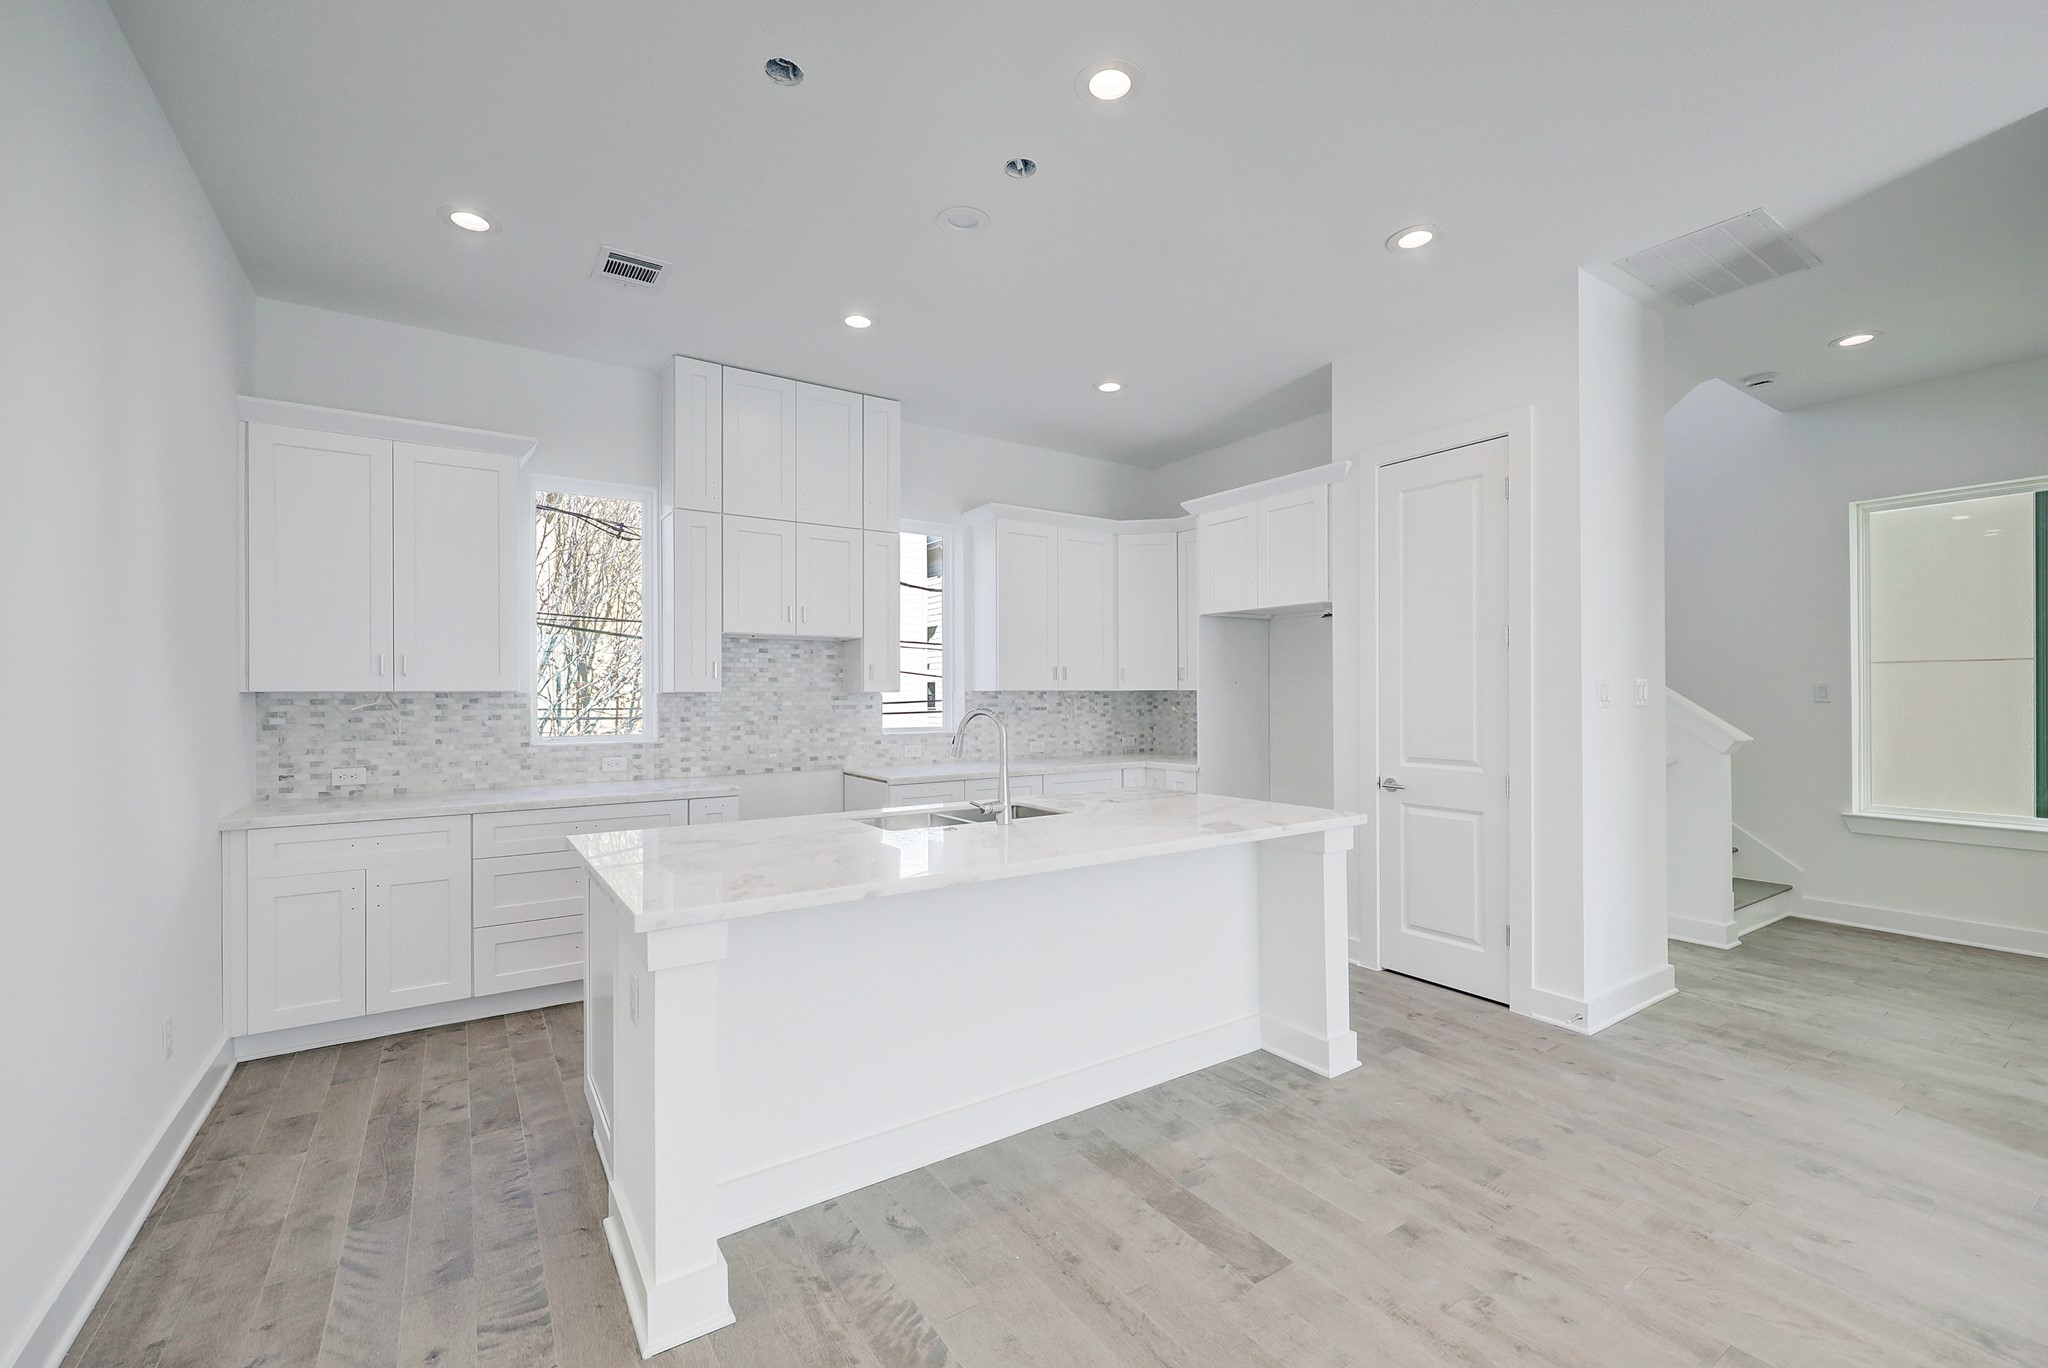 Kitchen with Cabinets to the Ceiling * Recessed Lighting.